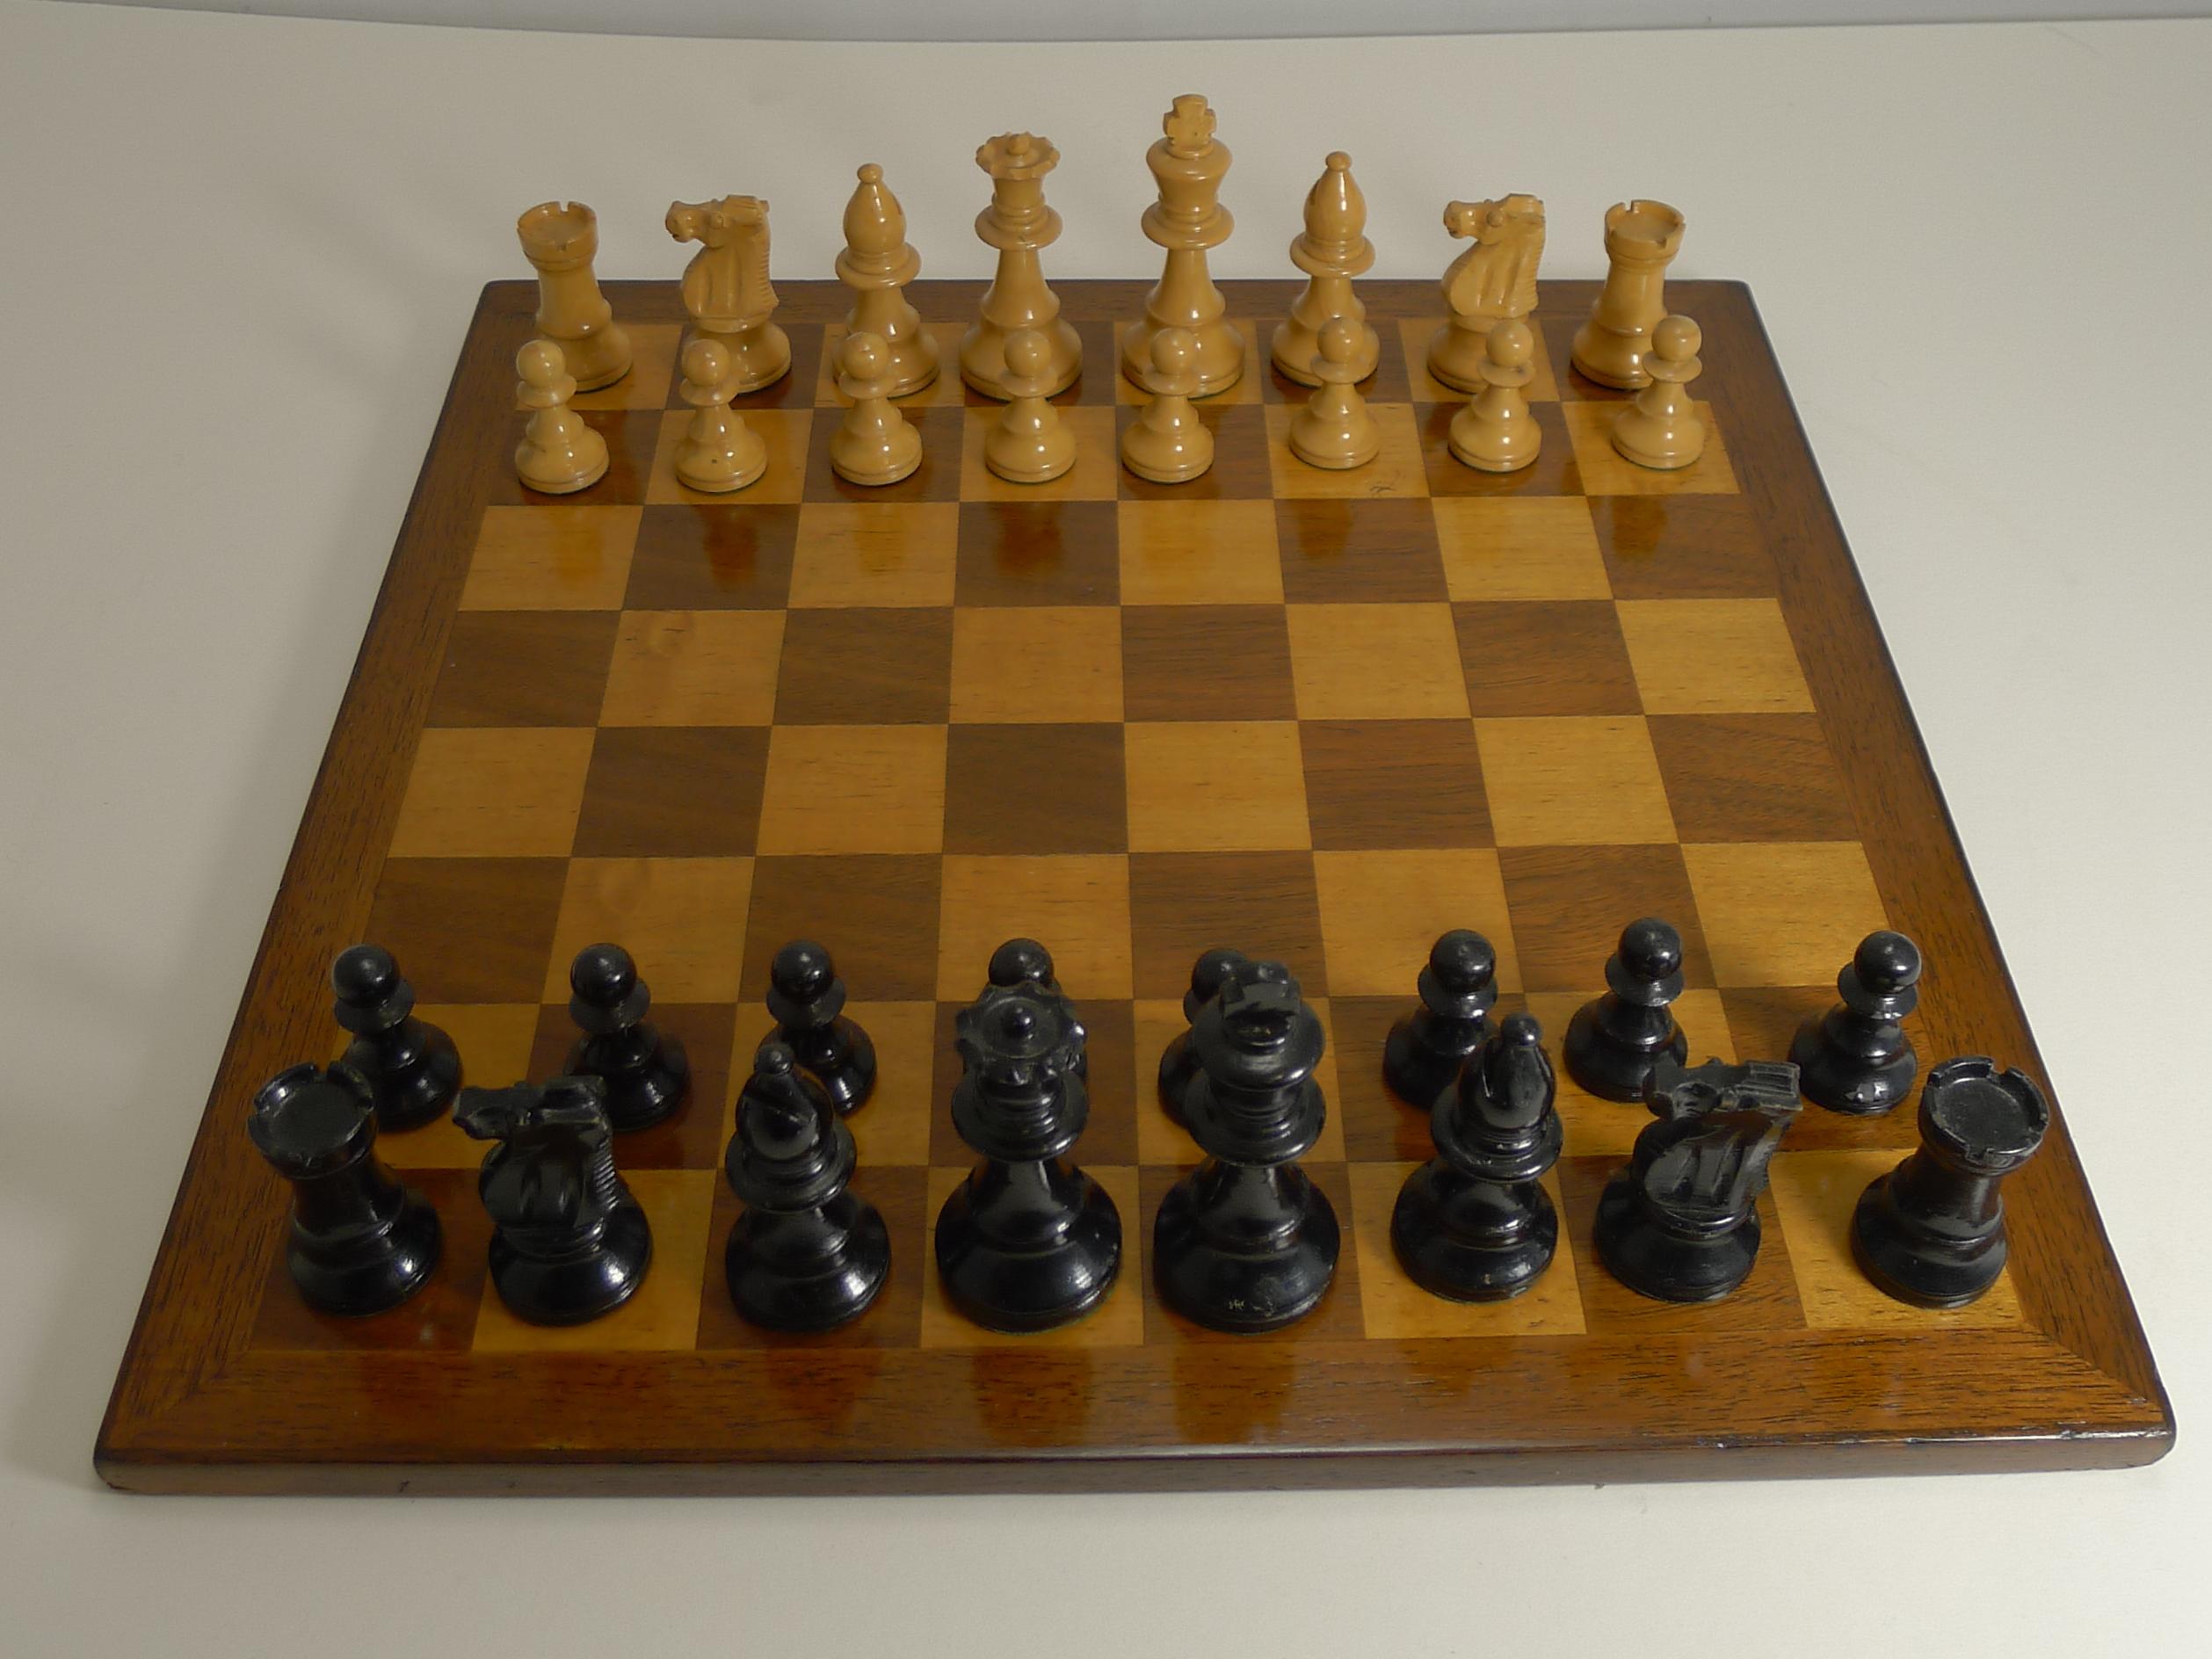 Wood Antique English Chess Board and Chess Set, circa 1910